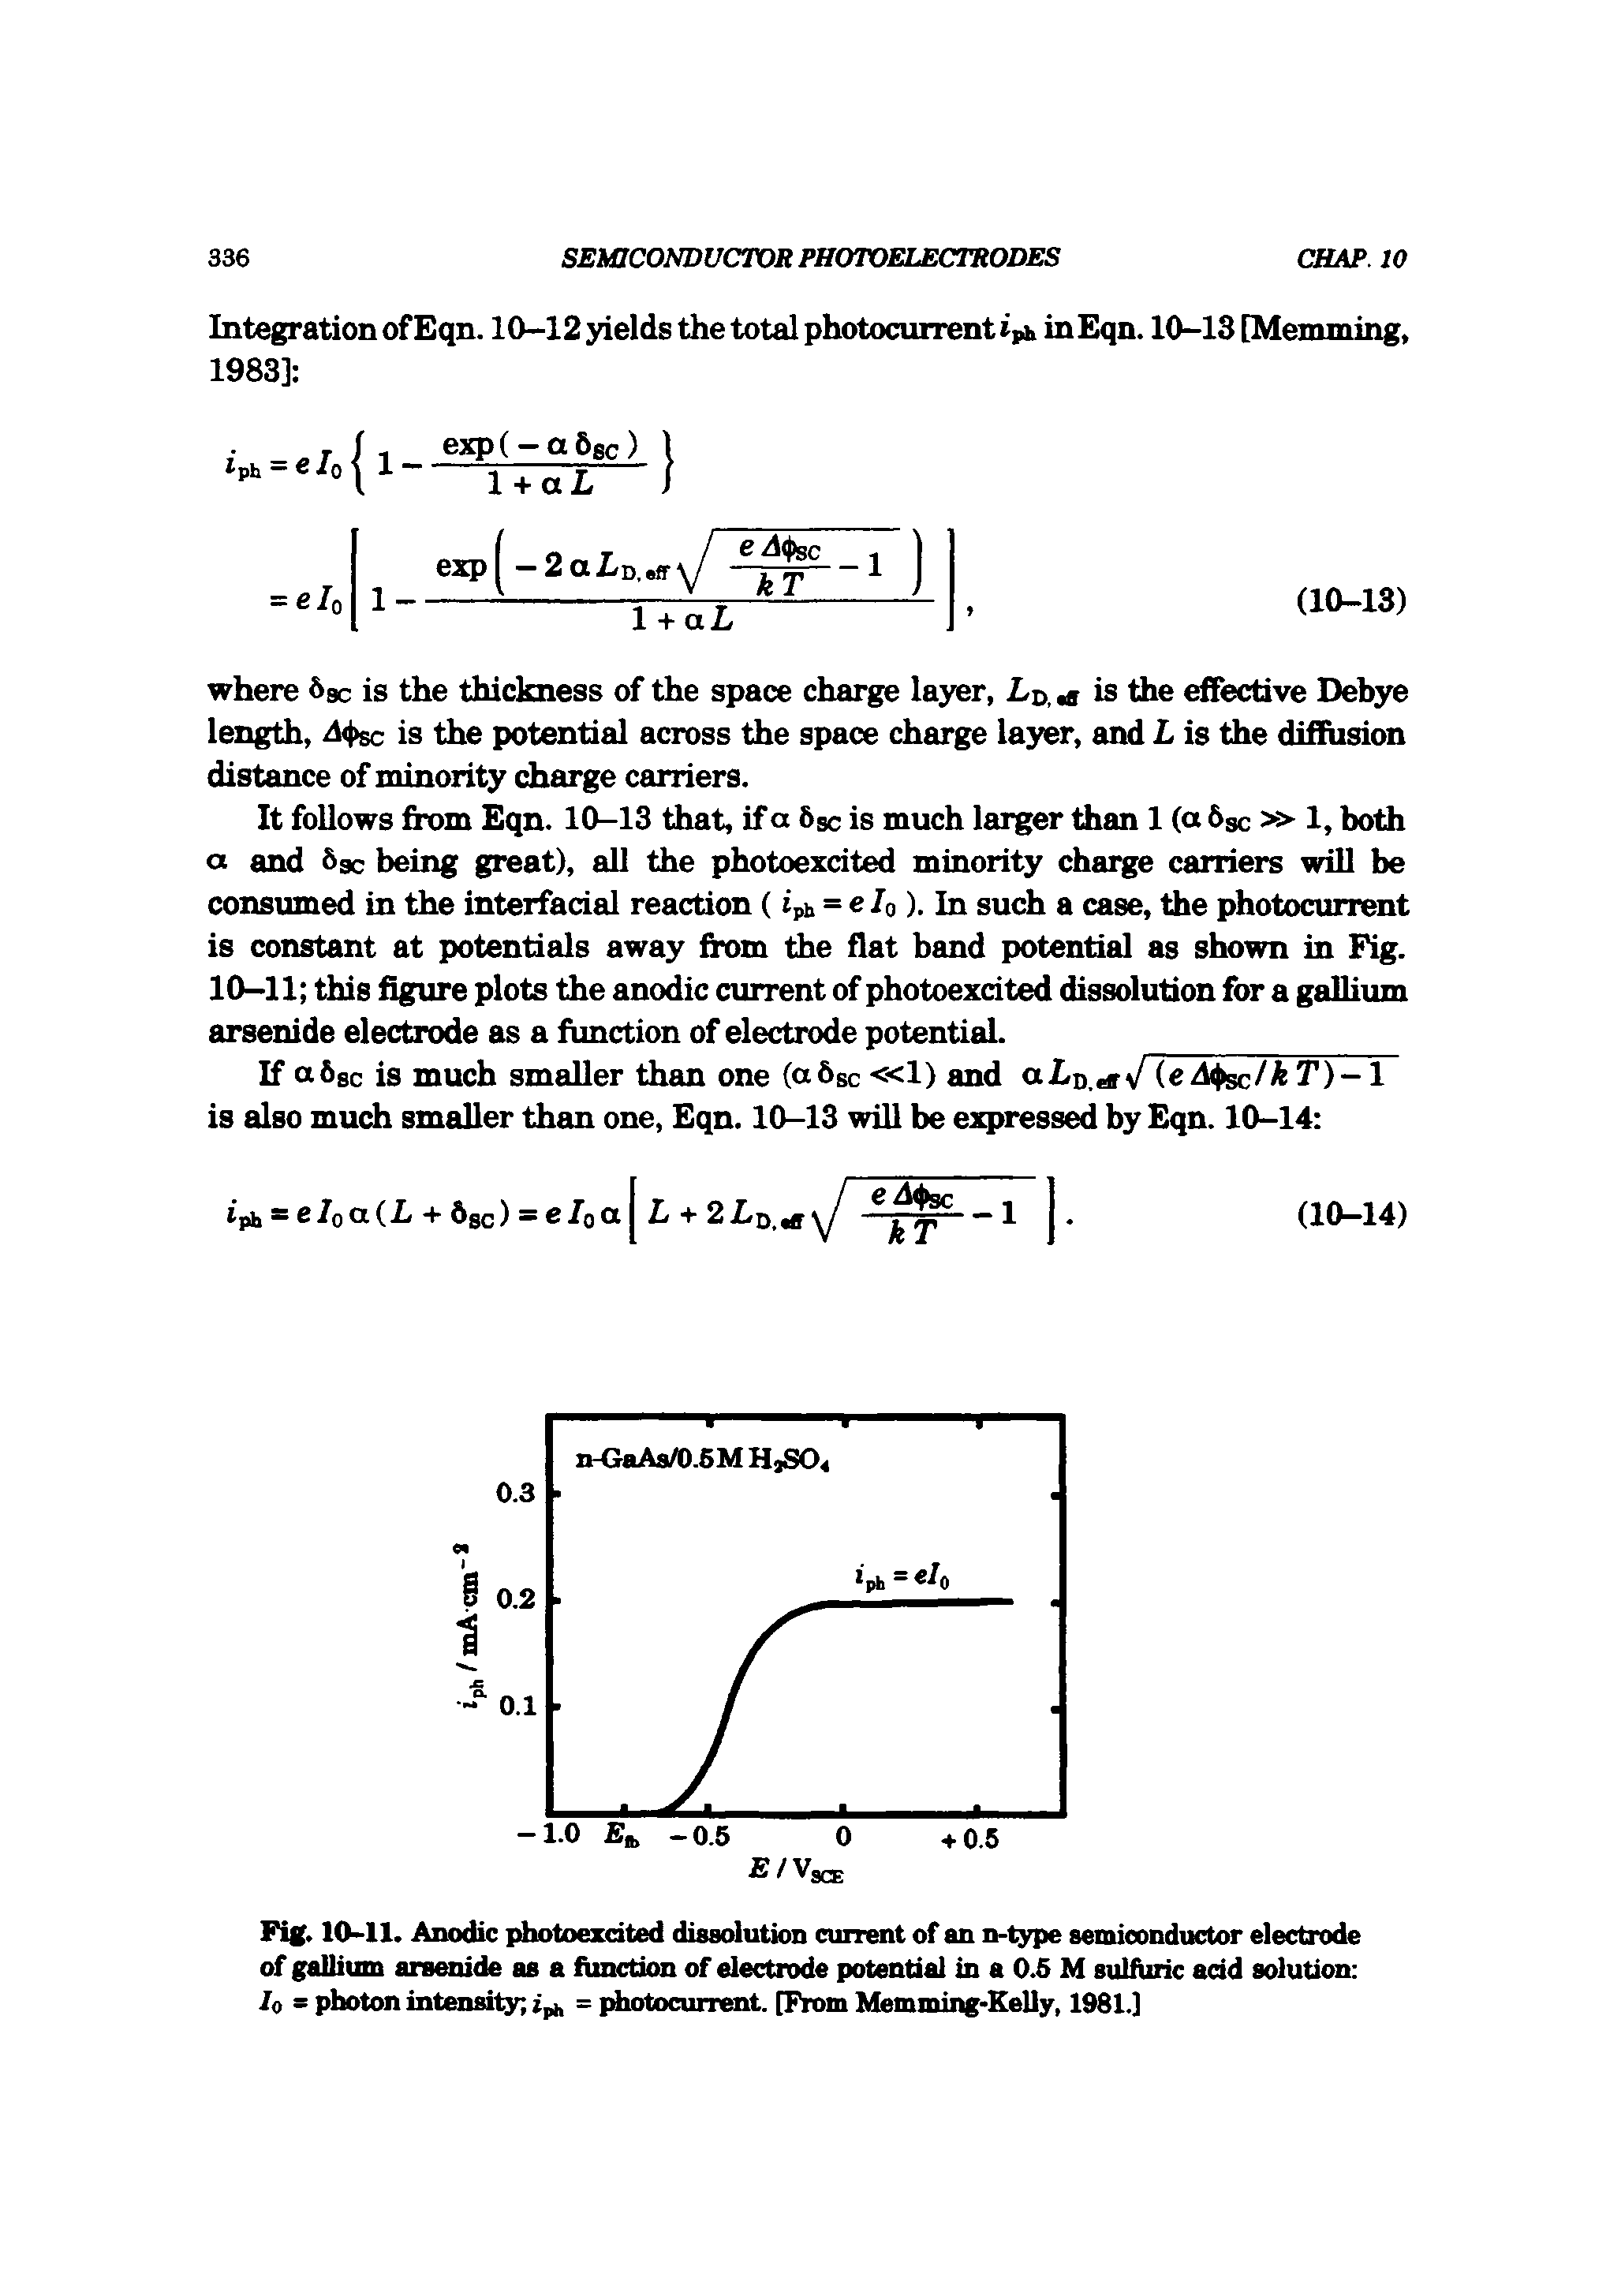 Fig. 10-11. Anodic photoexcited dissolution current of an n-type semiconductor electrode of gallium arsenide as a function of electrode potential in a 0.6 M sulfuric add solution lo - photon intensity = diotocurrent. [From Memming-Kelly, 1981.]...